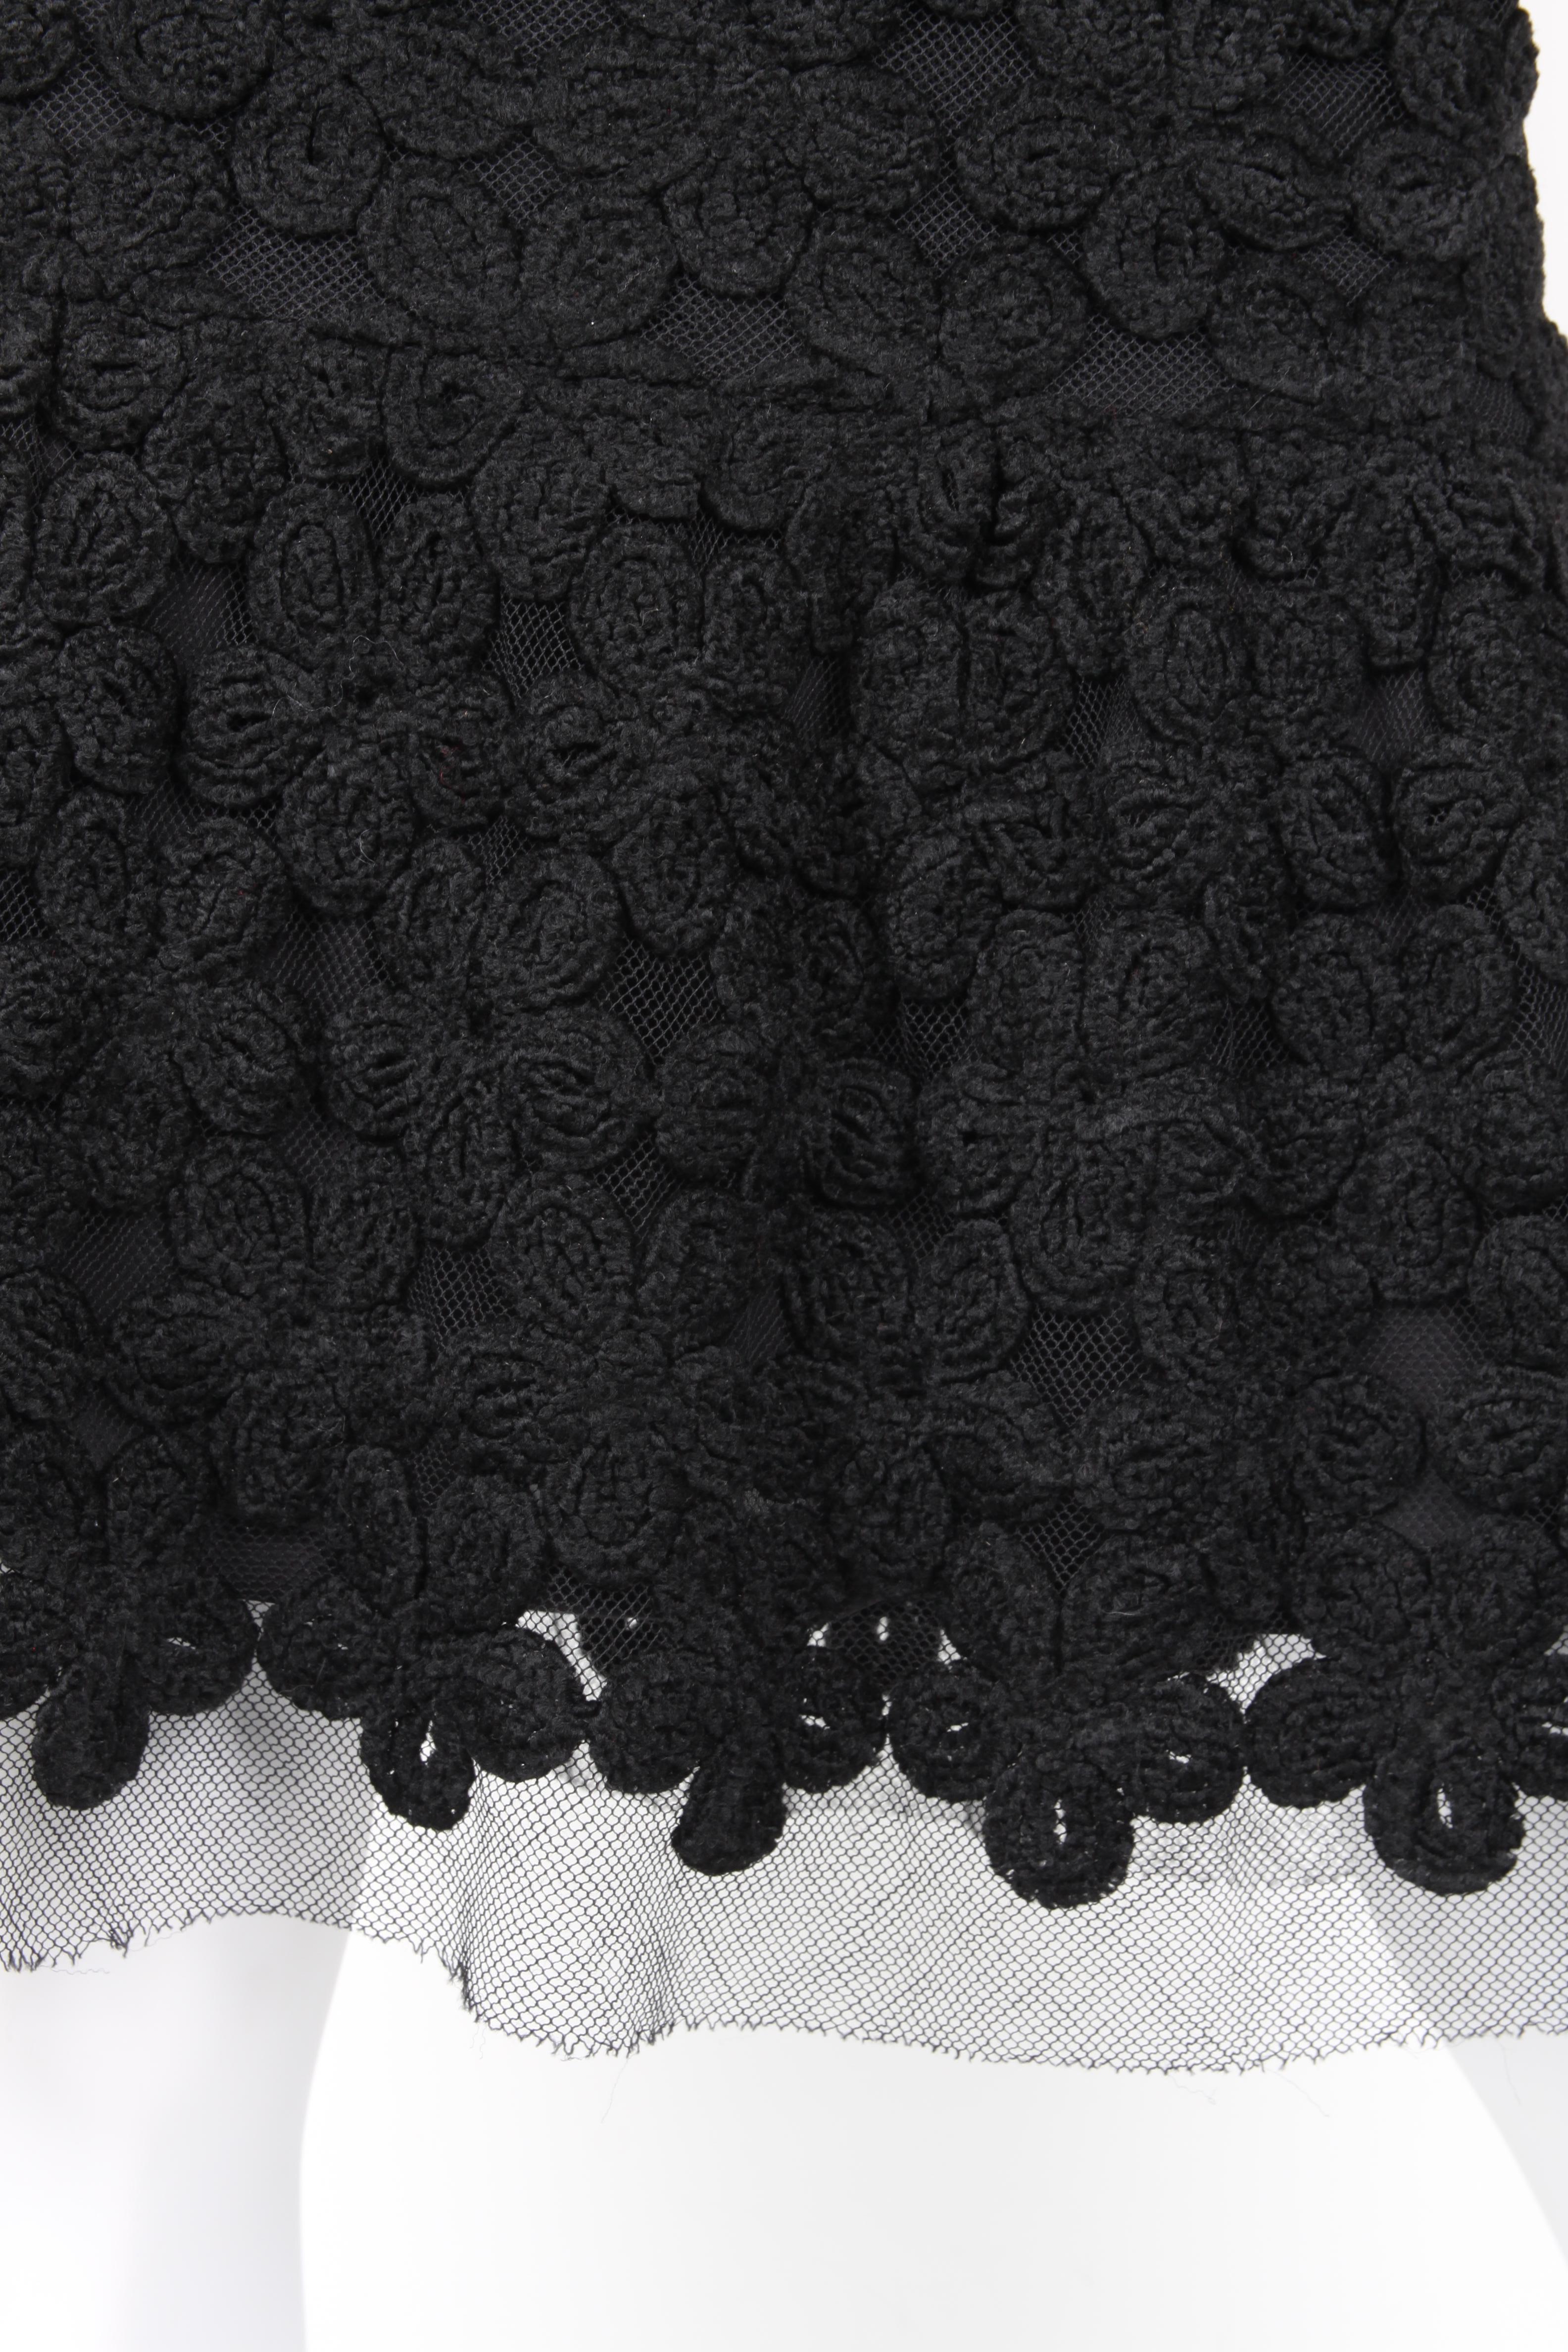 Chanel Fall/Winter 2005 Black Floral Crotchet Camelia Wool Mesh Dress In Excellent Condition For Sale In Baarn, NL